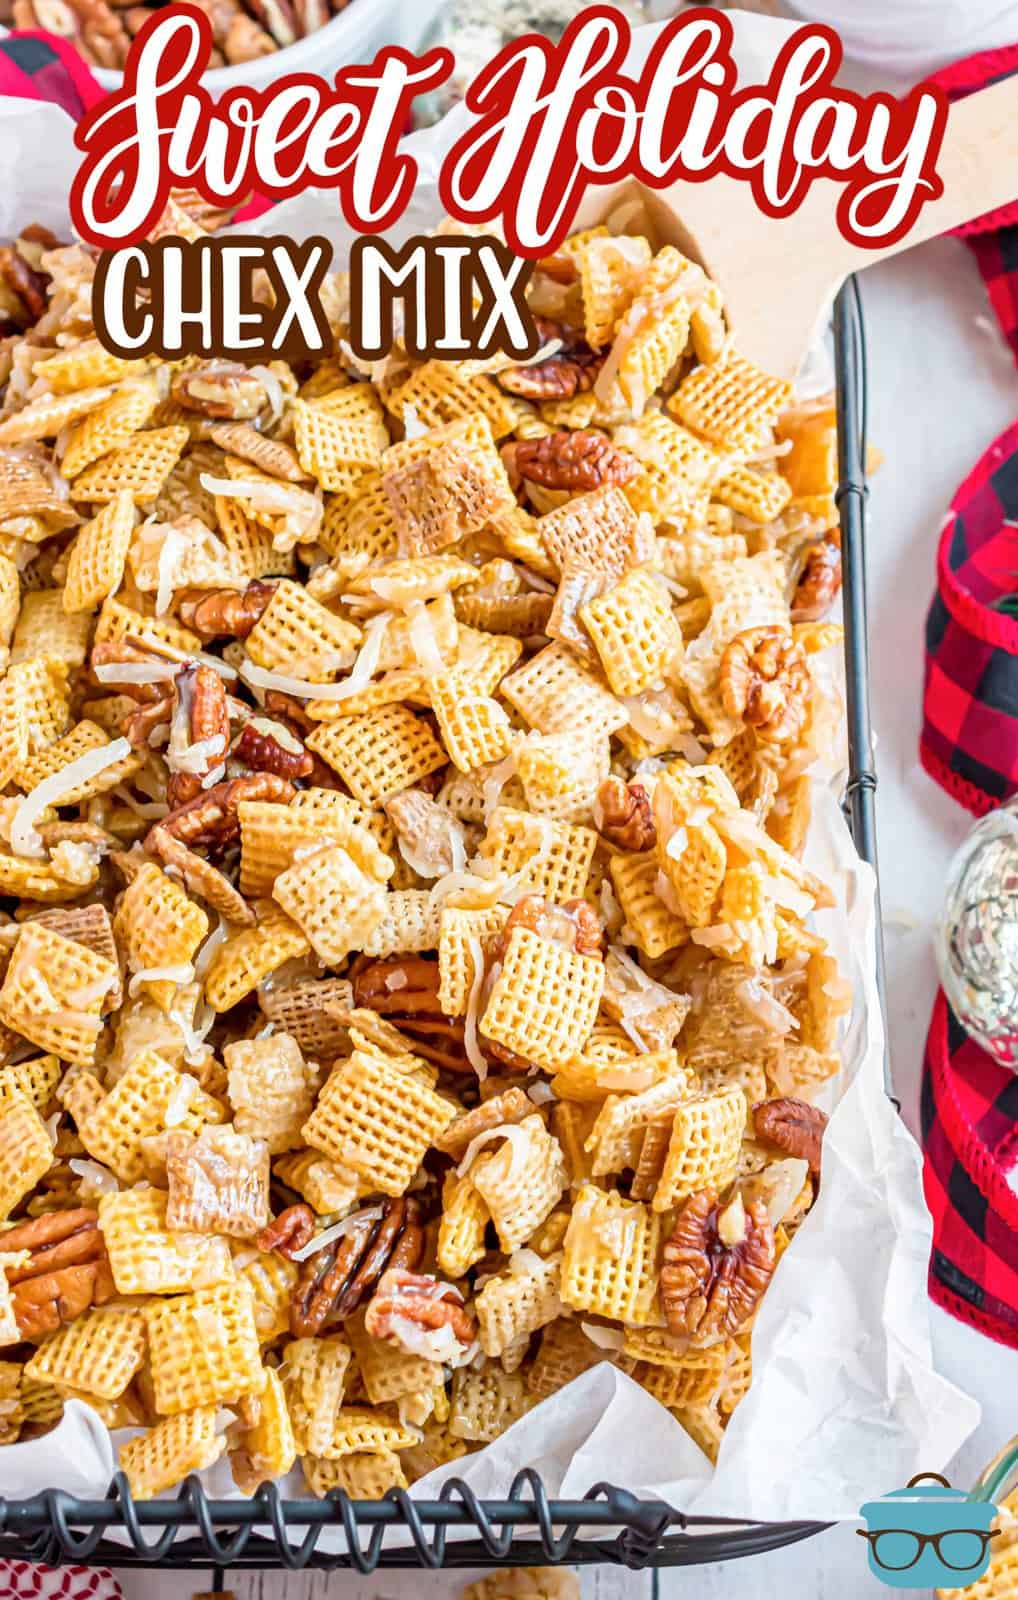 Pinterest image of Sweet Holiday Chex Mix with parchment paper on serving tray.